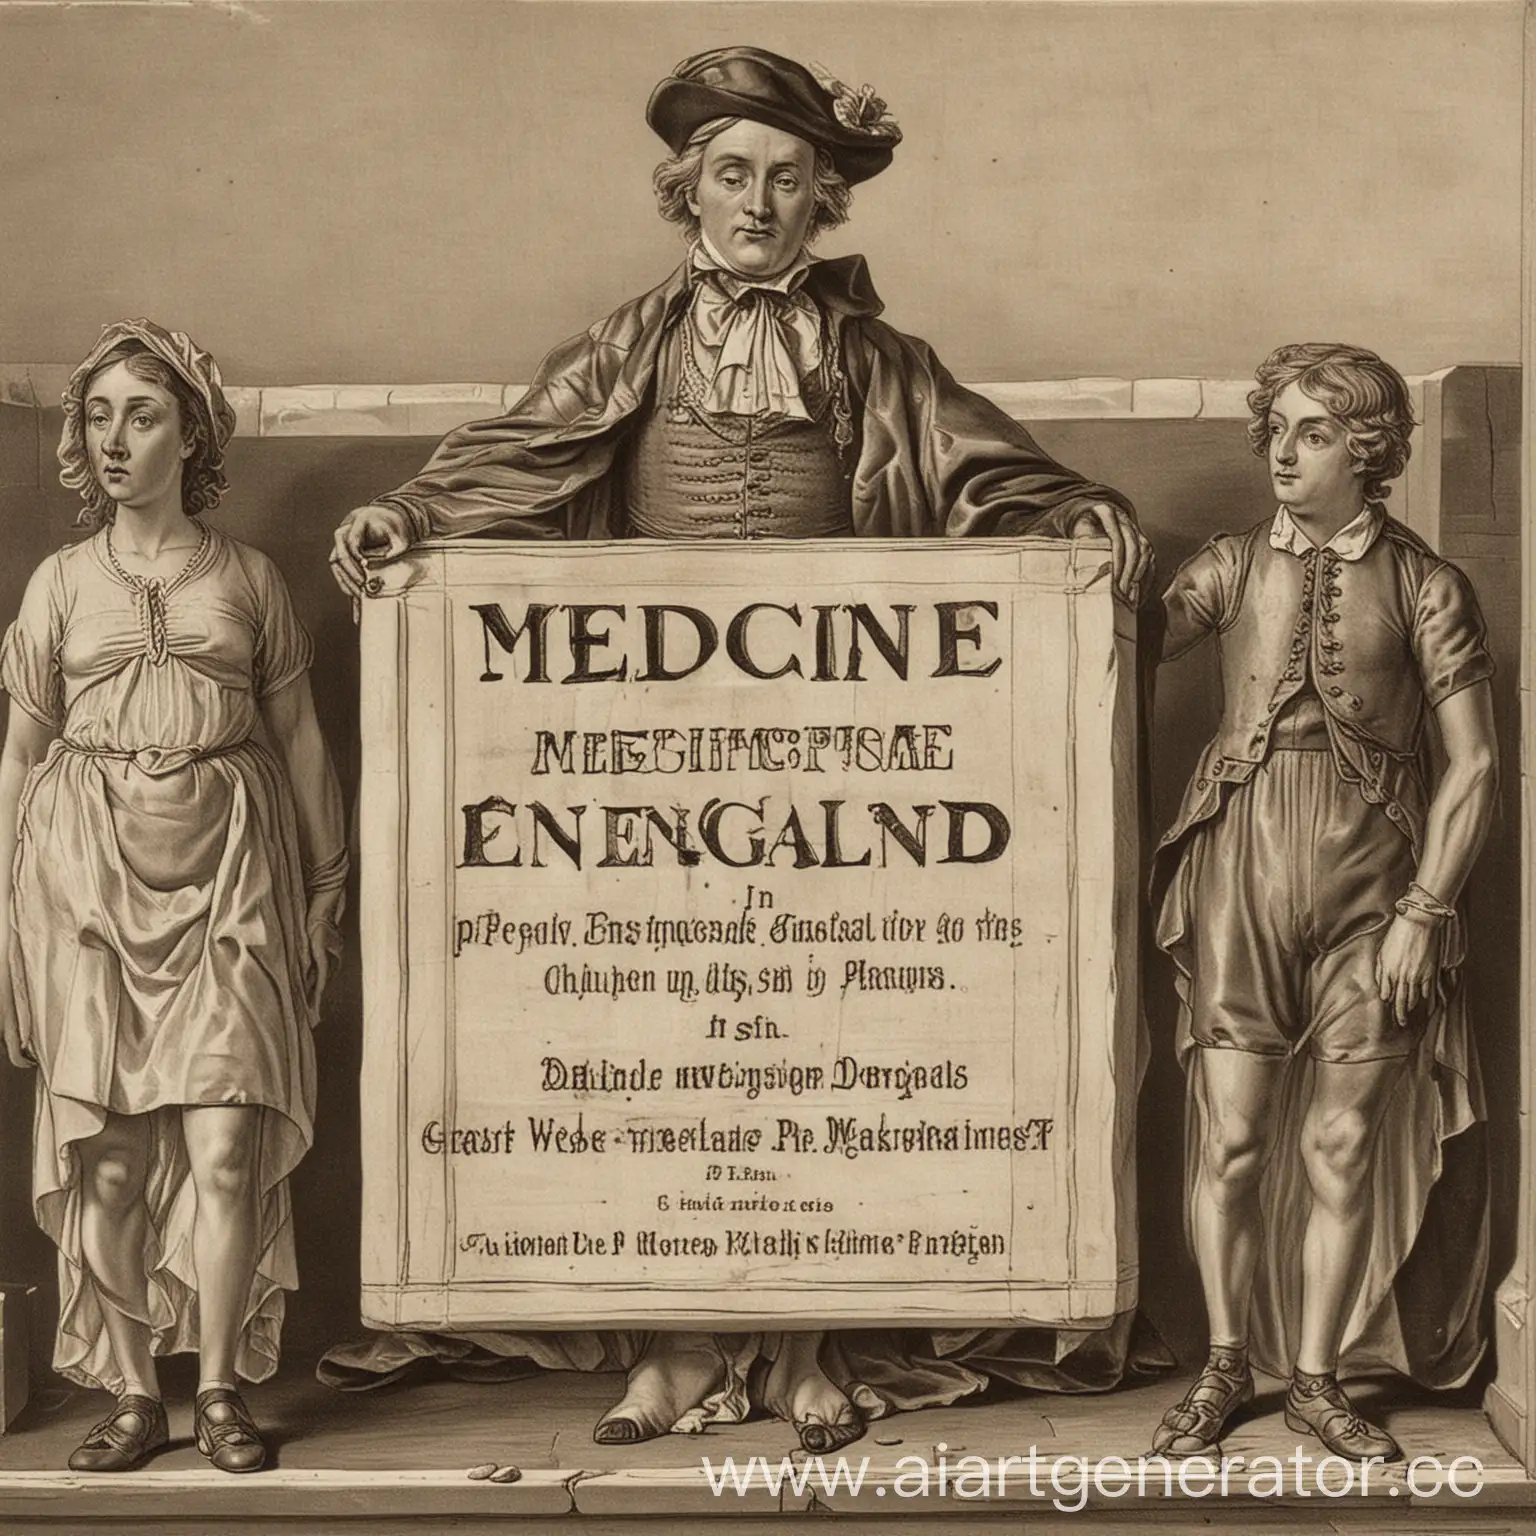 Modern-Medicine-Practices-in-England-A-Comprehensive-Overview